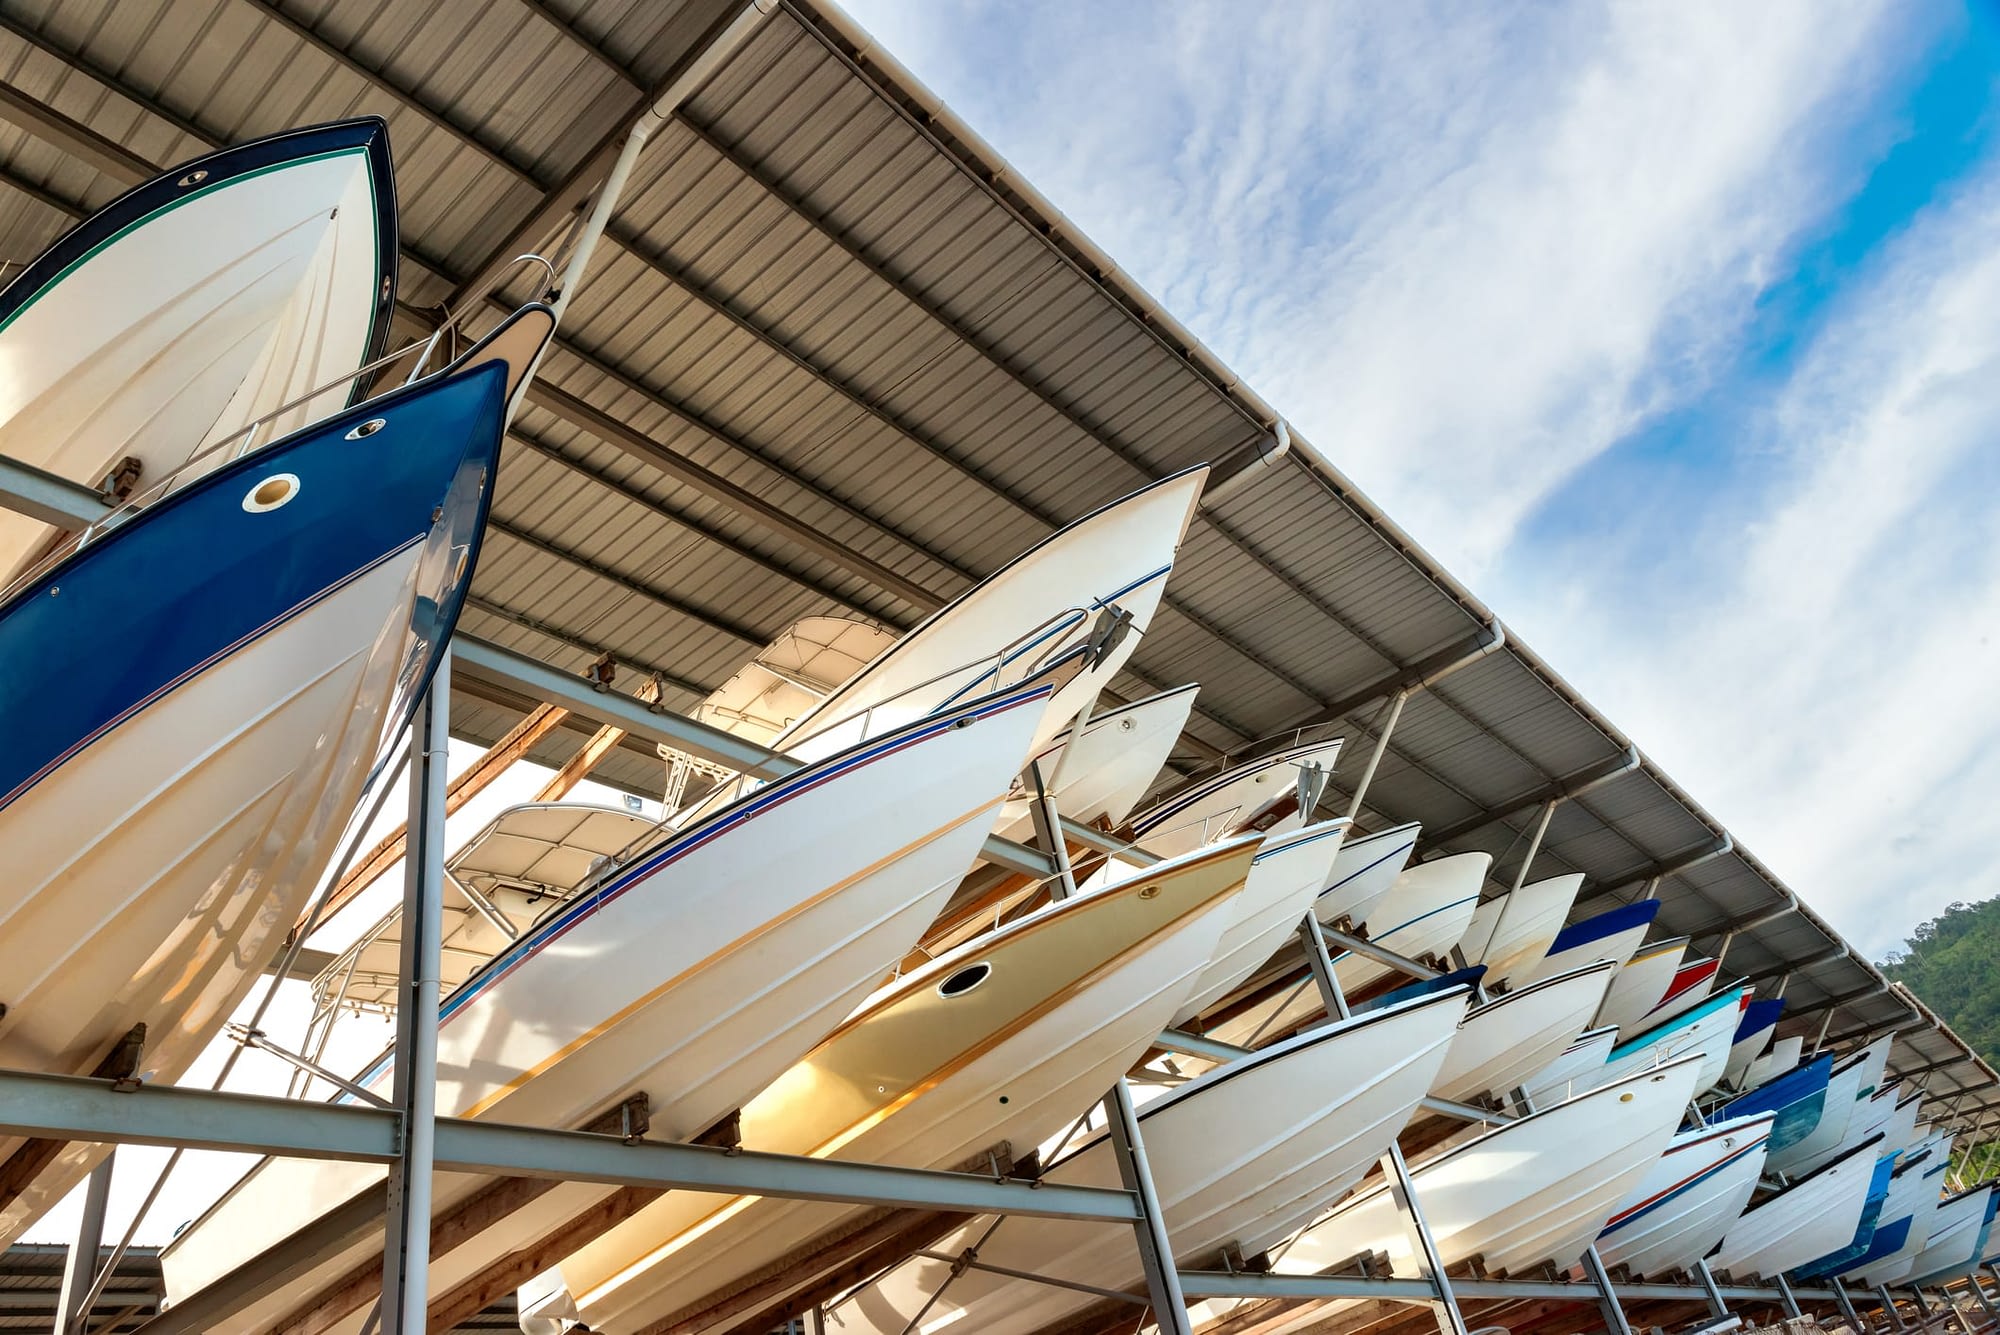 Boats in Sheltered Parking Facility